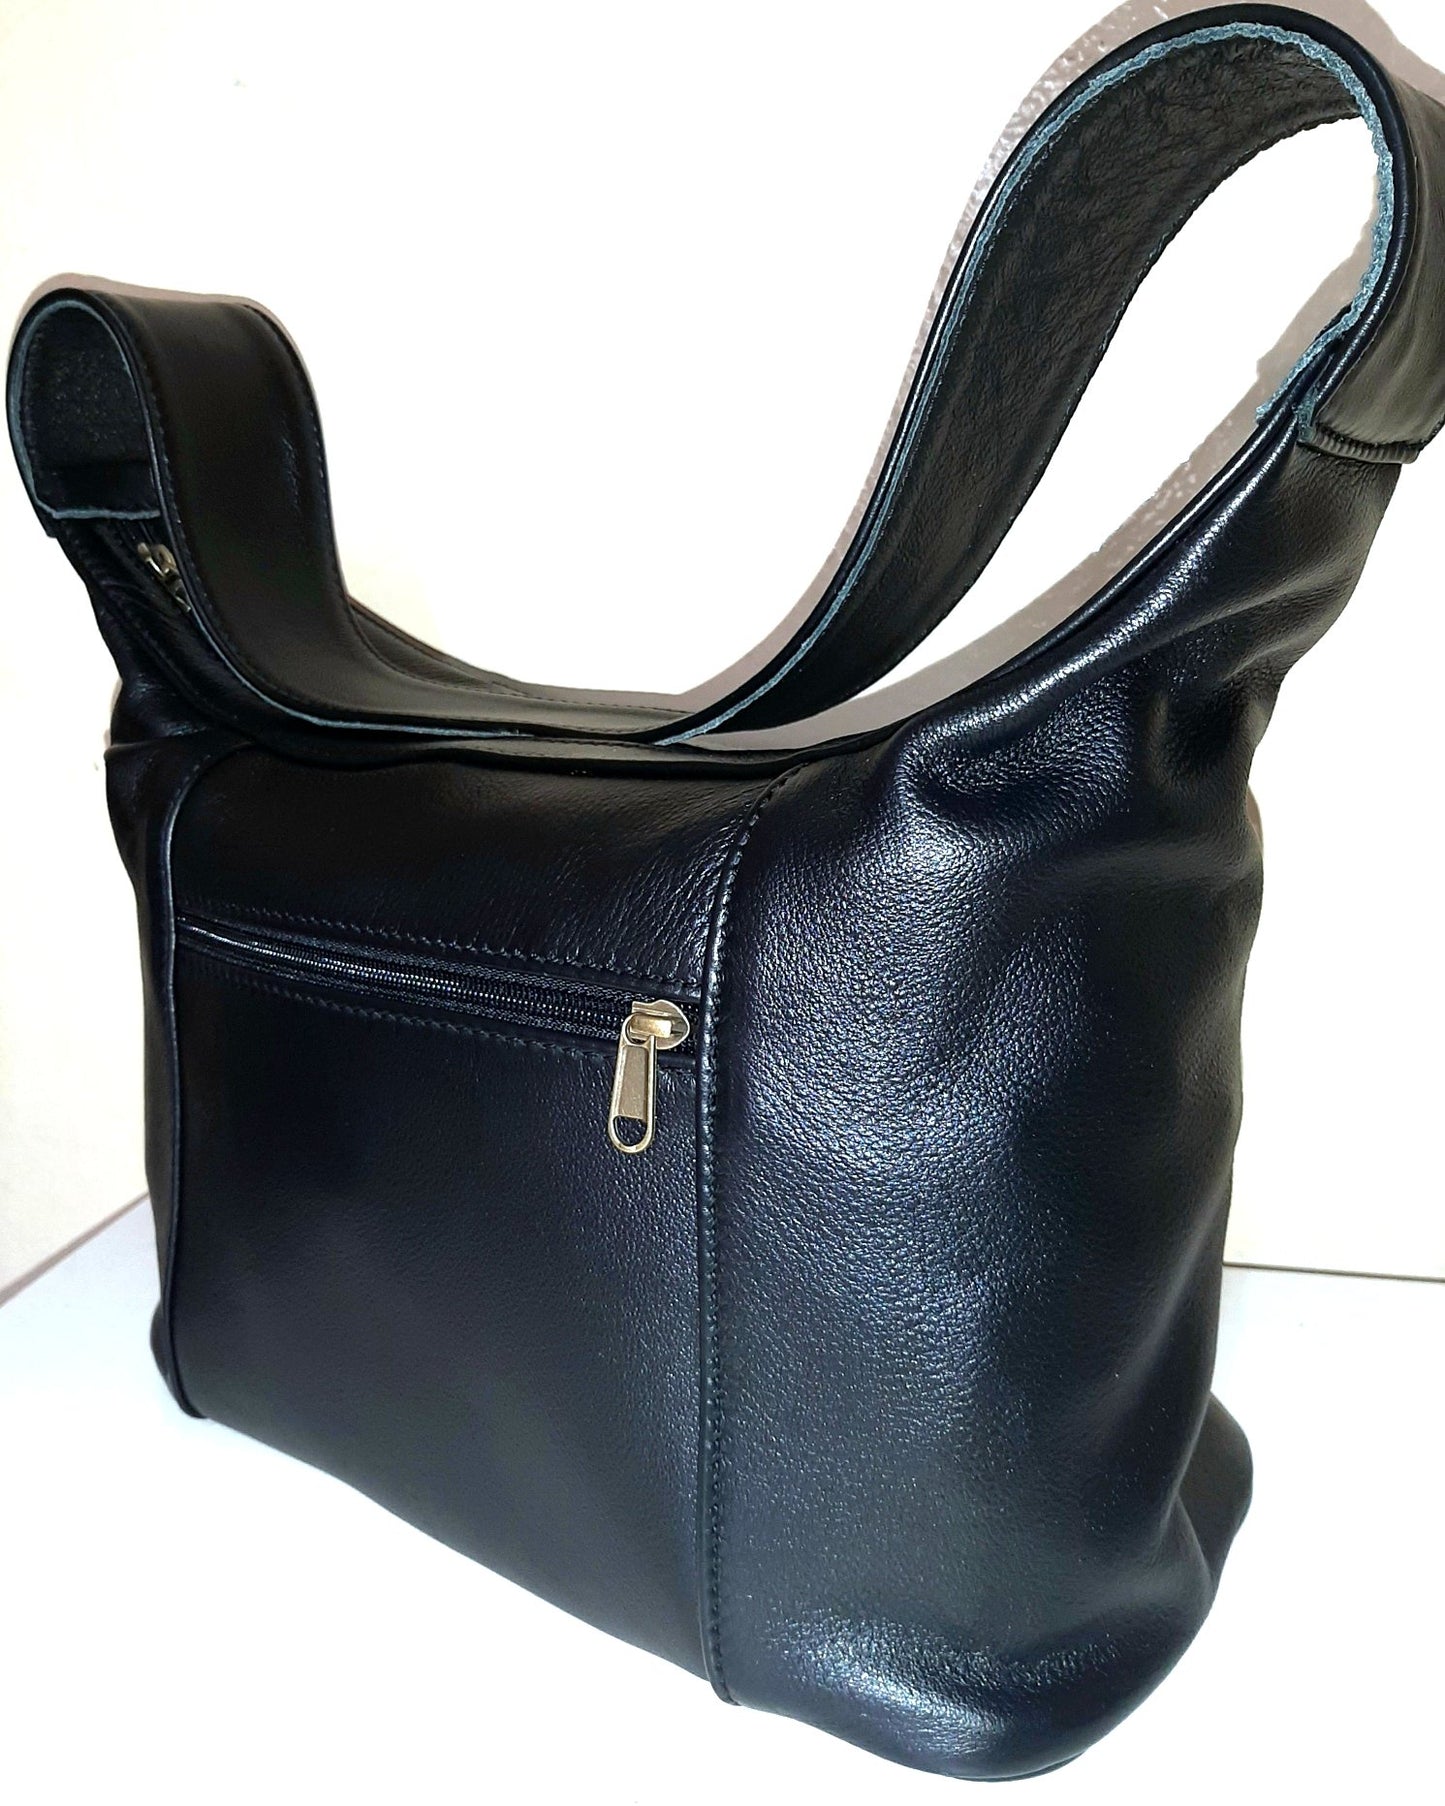 Gb7 leather bags in black - cape Masai Leather